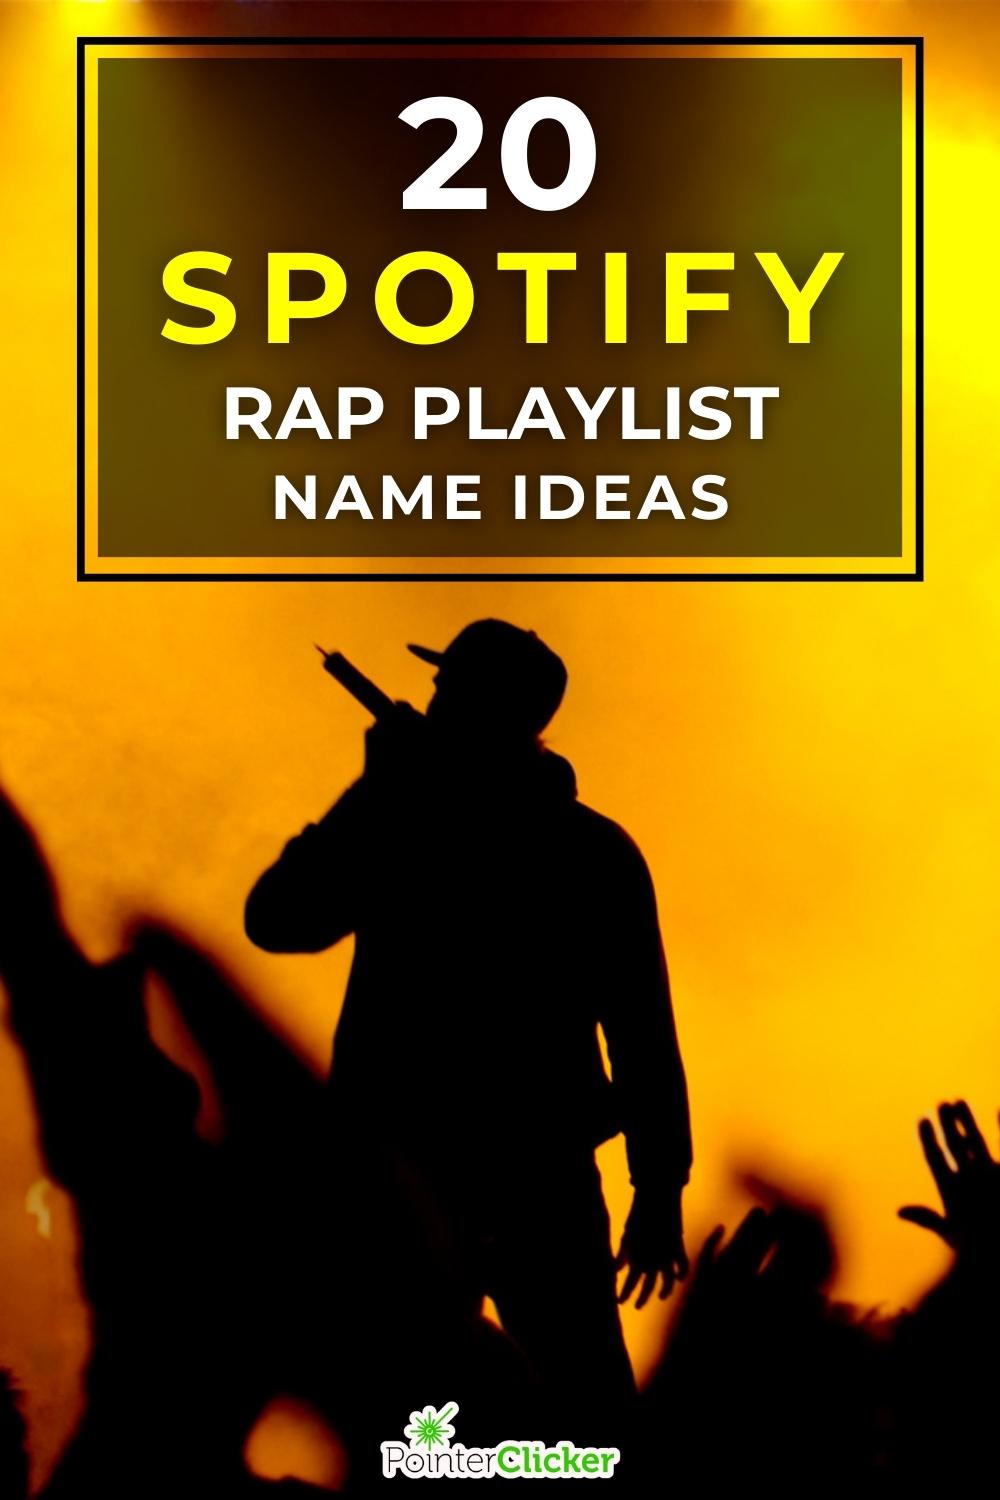 20 spotify playlist name ideas for rap music